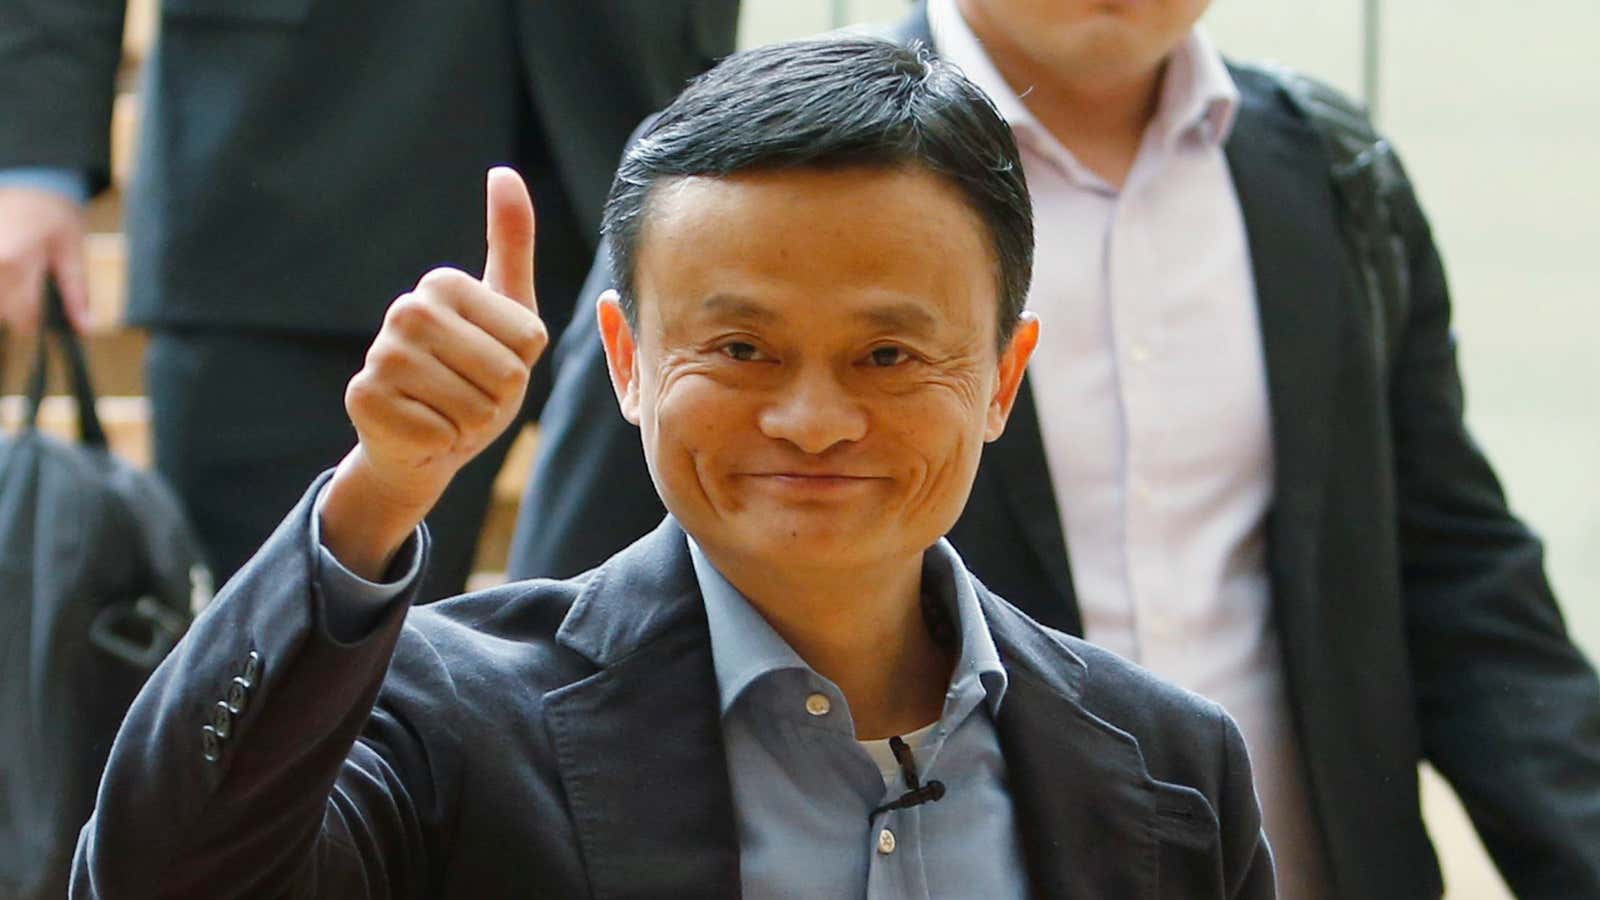 Alibaba founder Jack Ma gives a thumbs up to free markets.